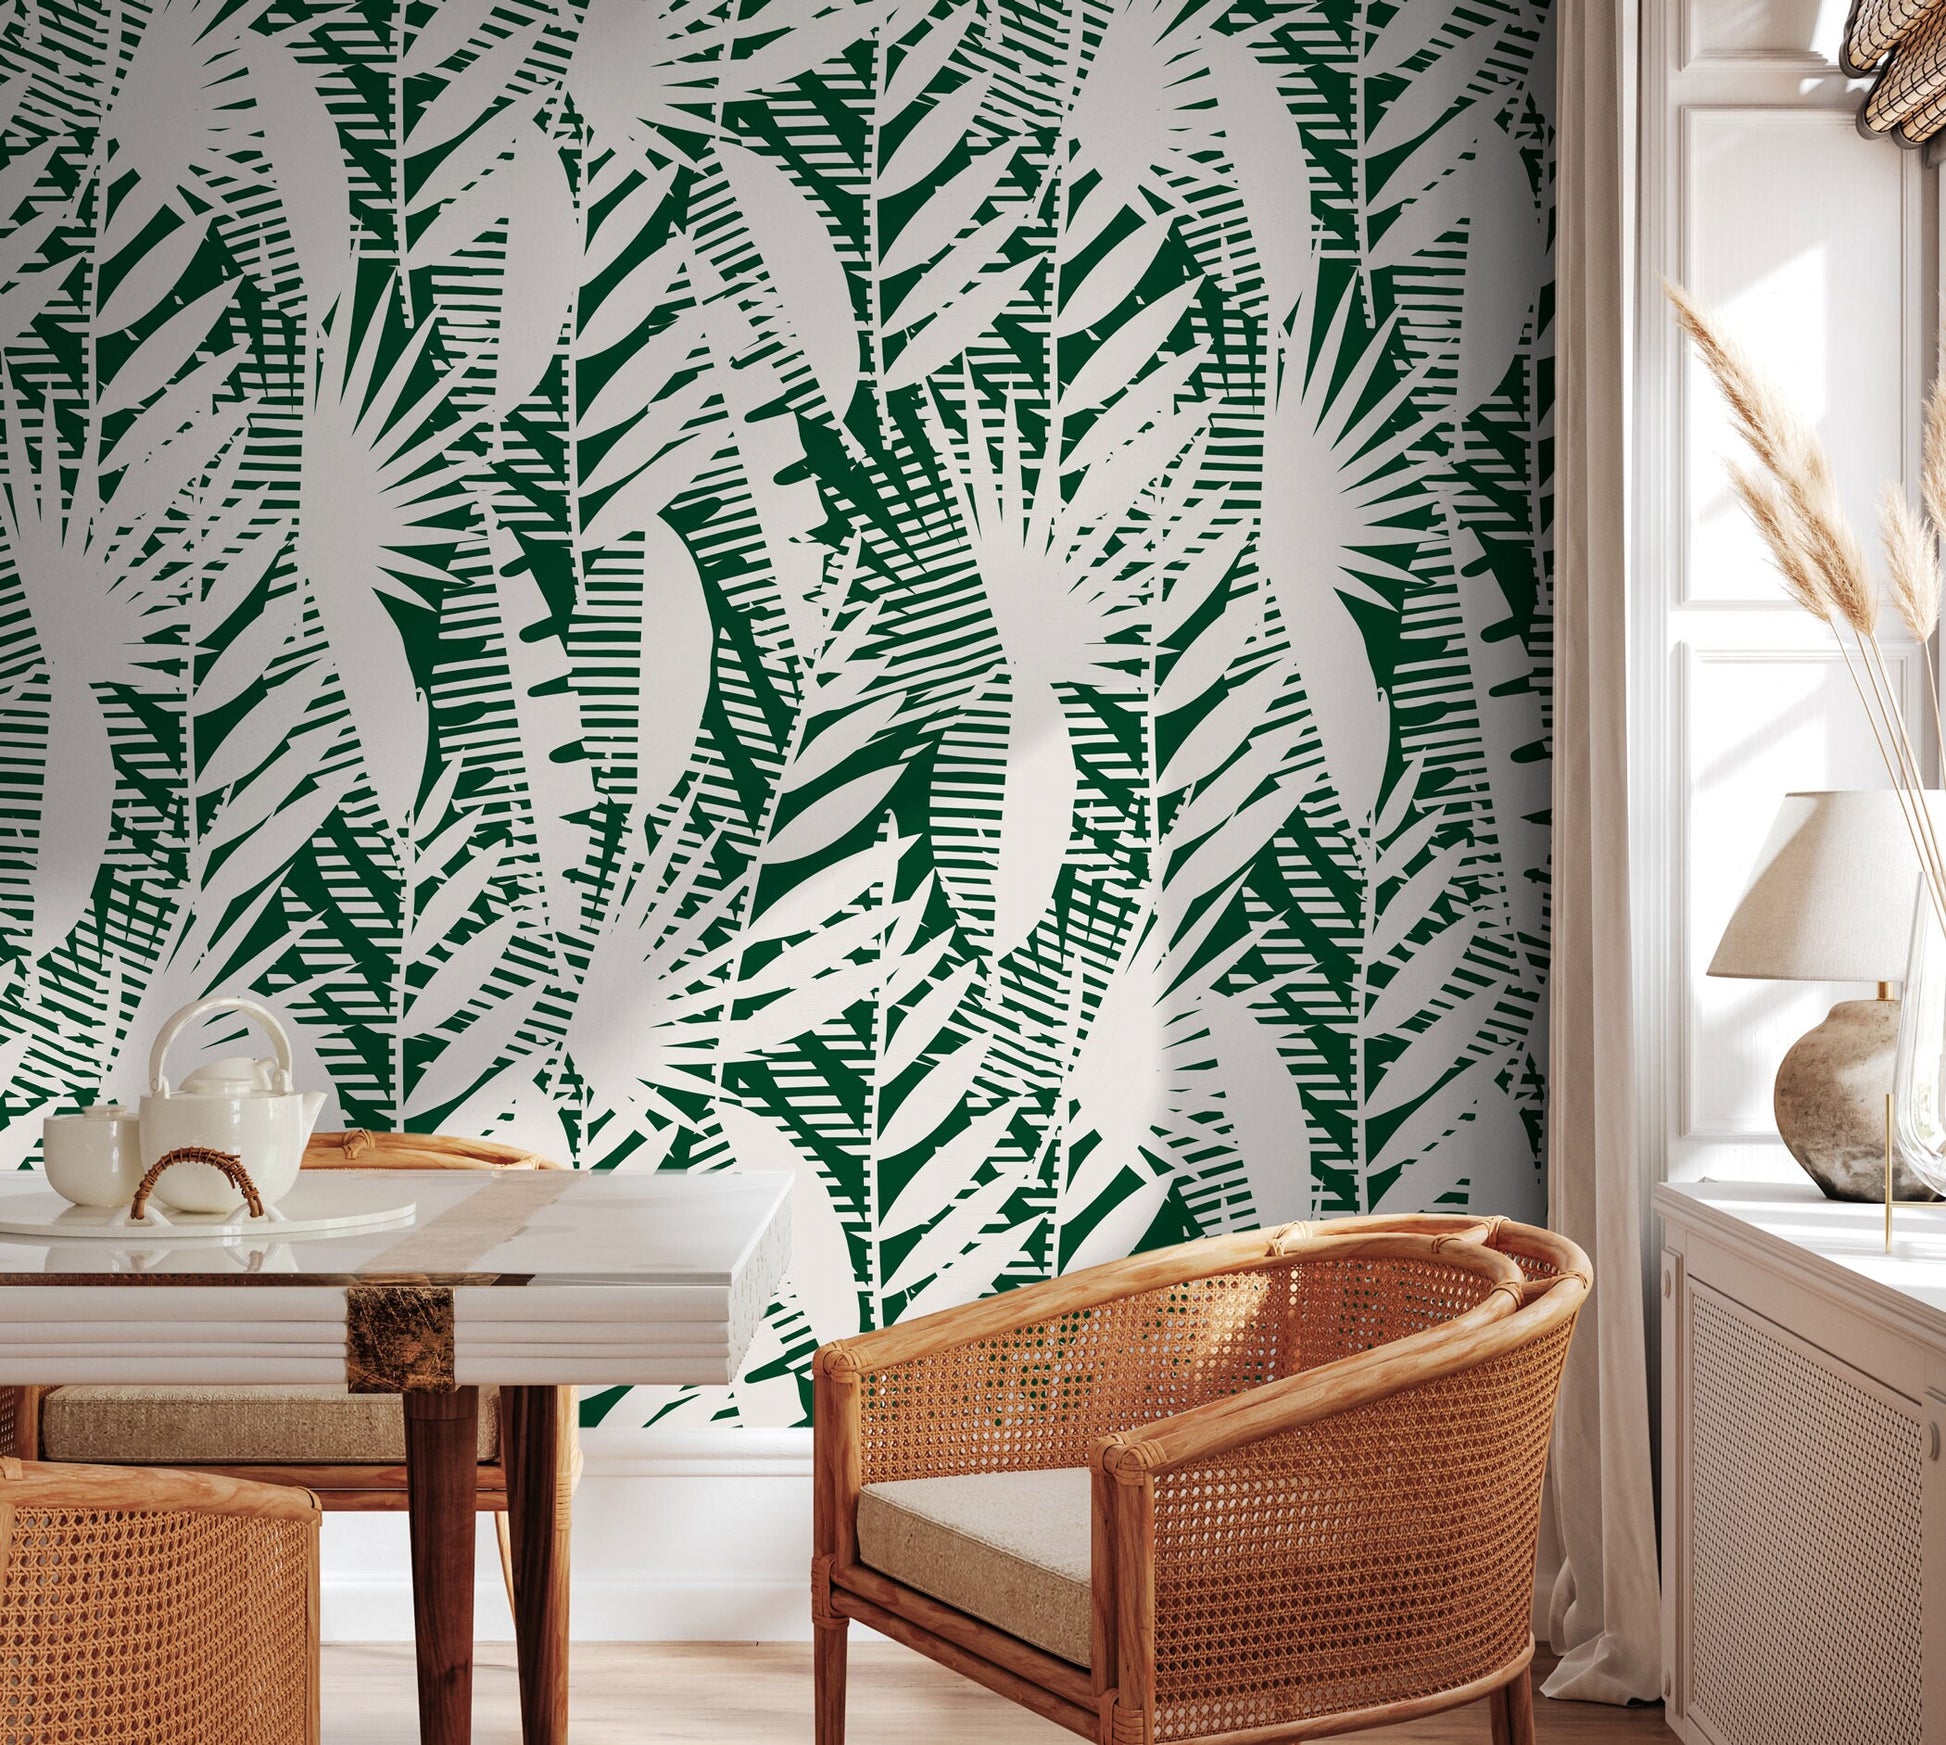 Wallpaper Peel and Stick Wallpaper Removable Wallpaper Home Decor Wall Art Wall Decor Room Decor / Abstract Green Leaves Wallpaper - C401